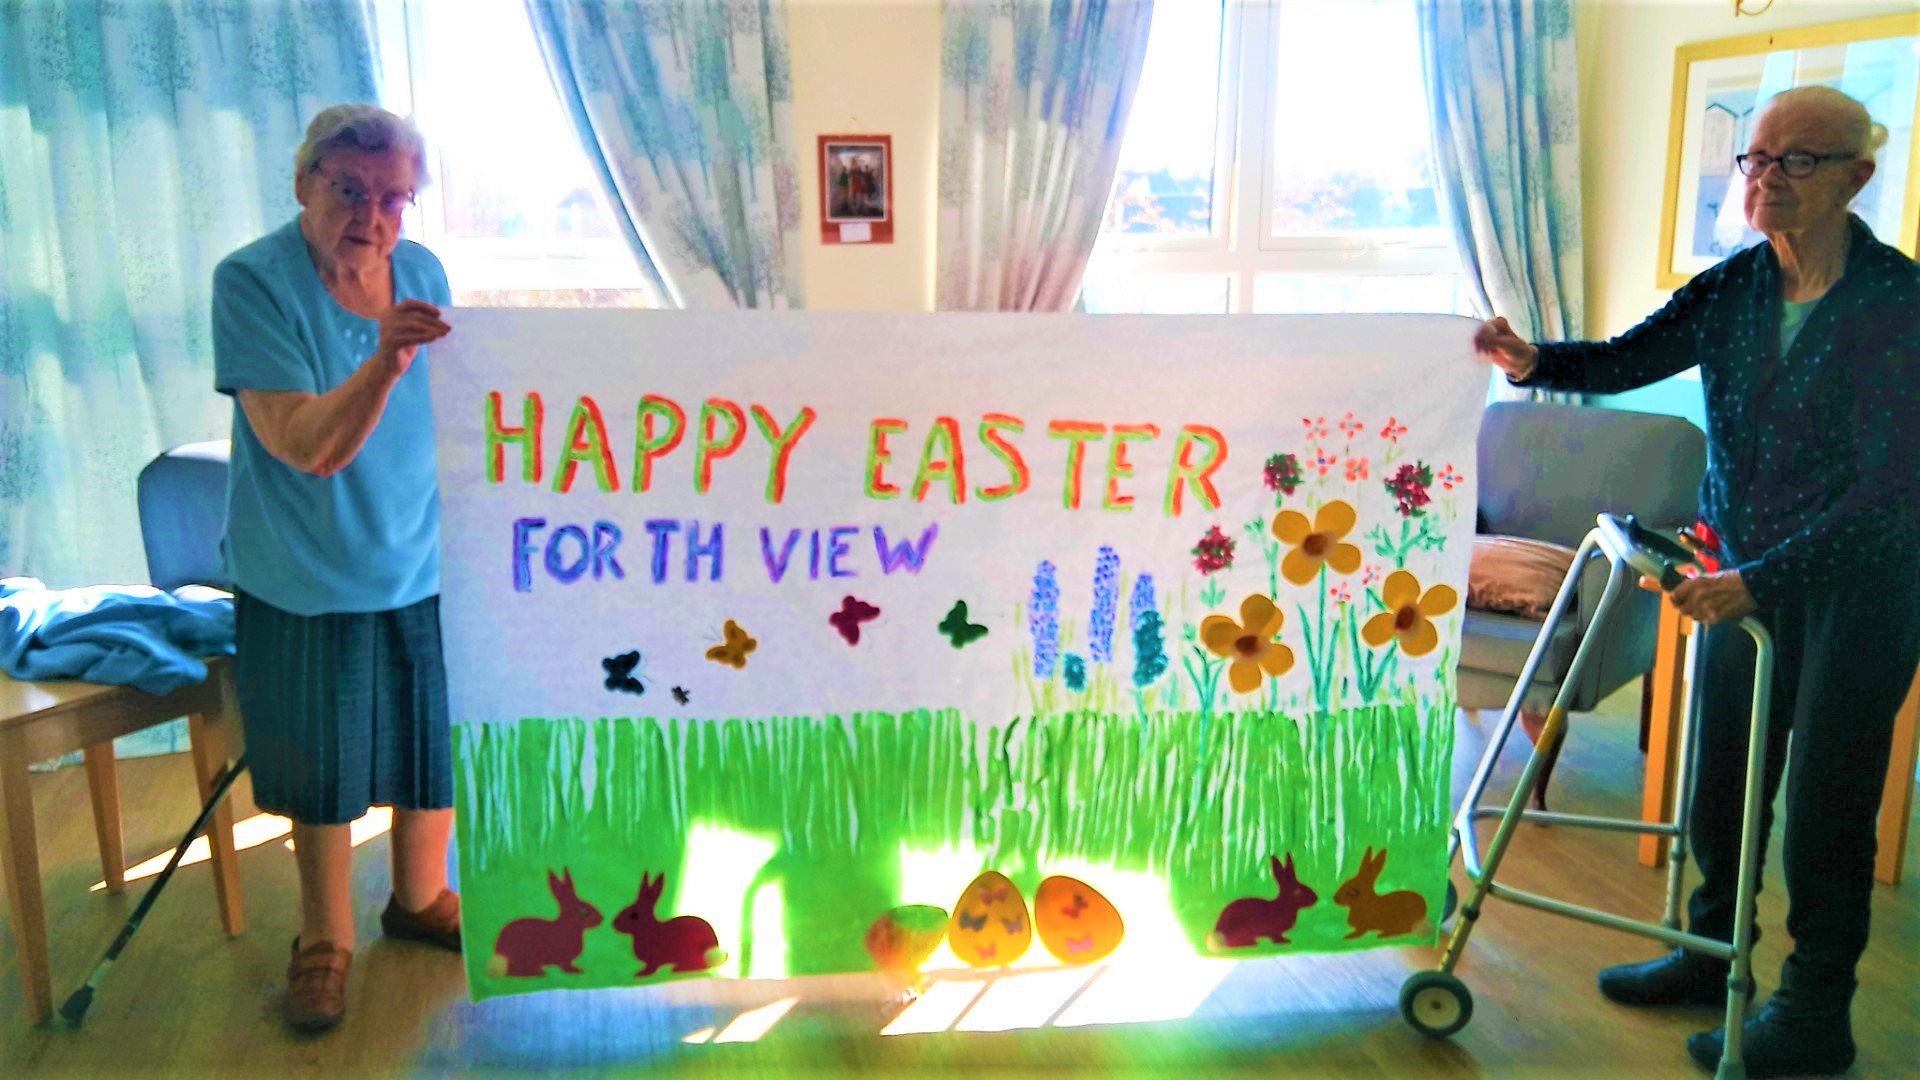 Forth View - residents holding home madeEaster banner